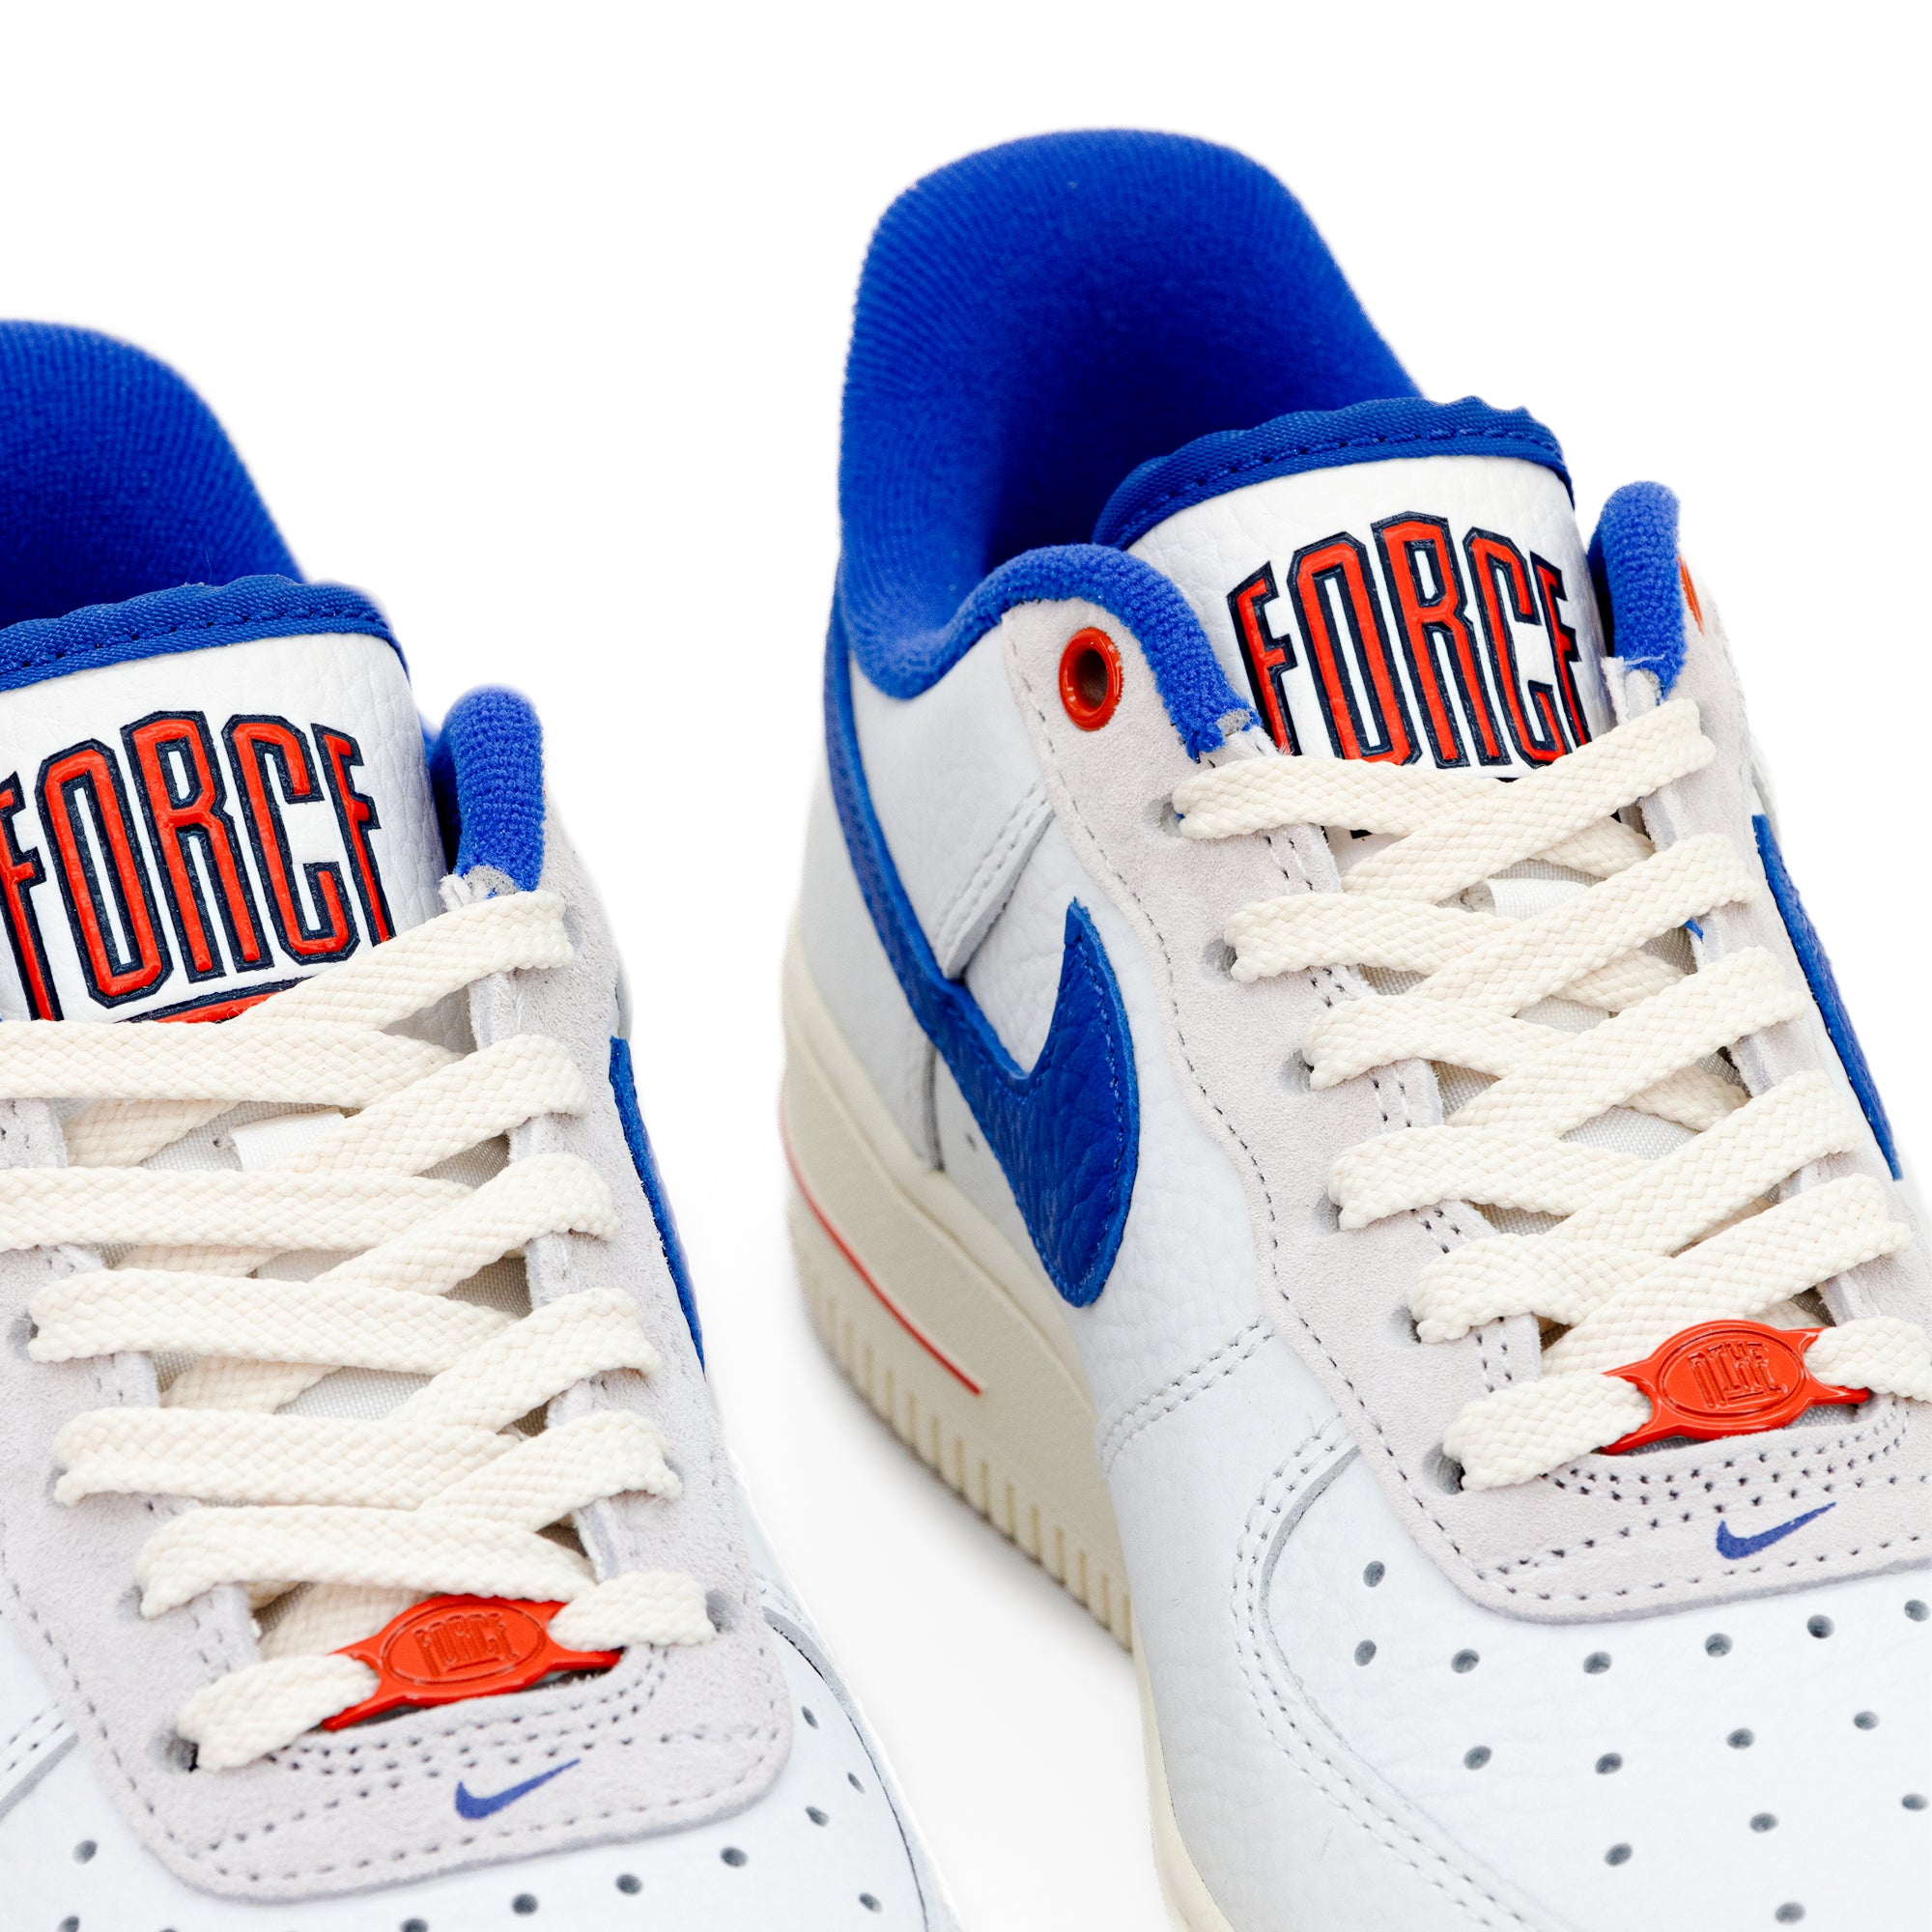 Asser Competir pegamento Nike Women's Air Force 1 "Command Force" Summit White/Hyper Royal-Pica –  Laced